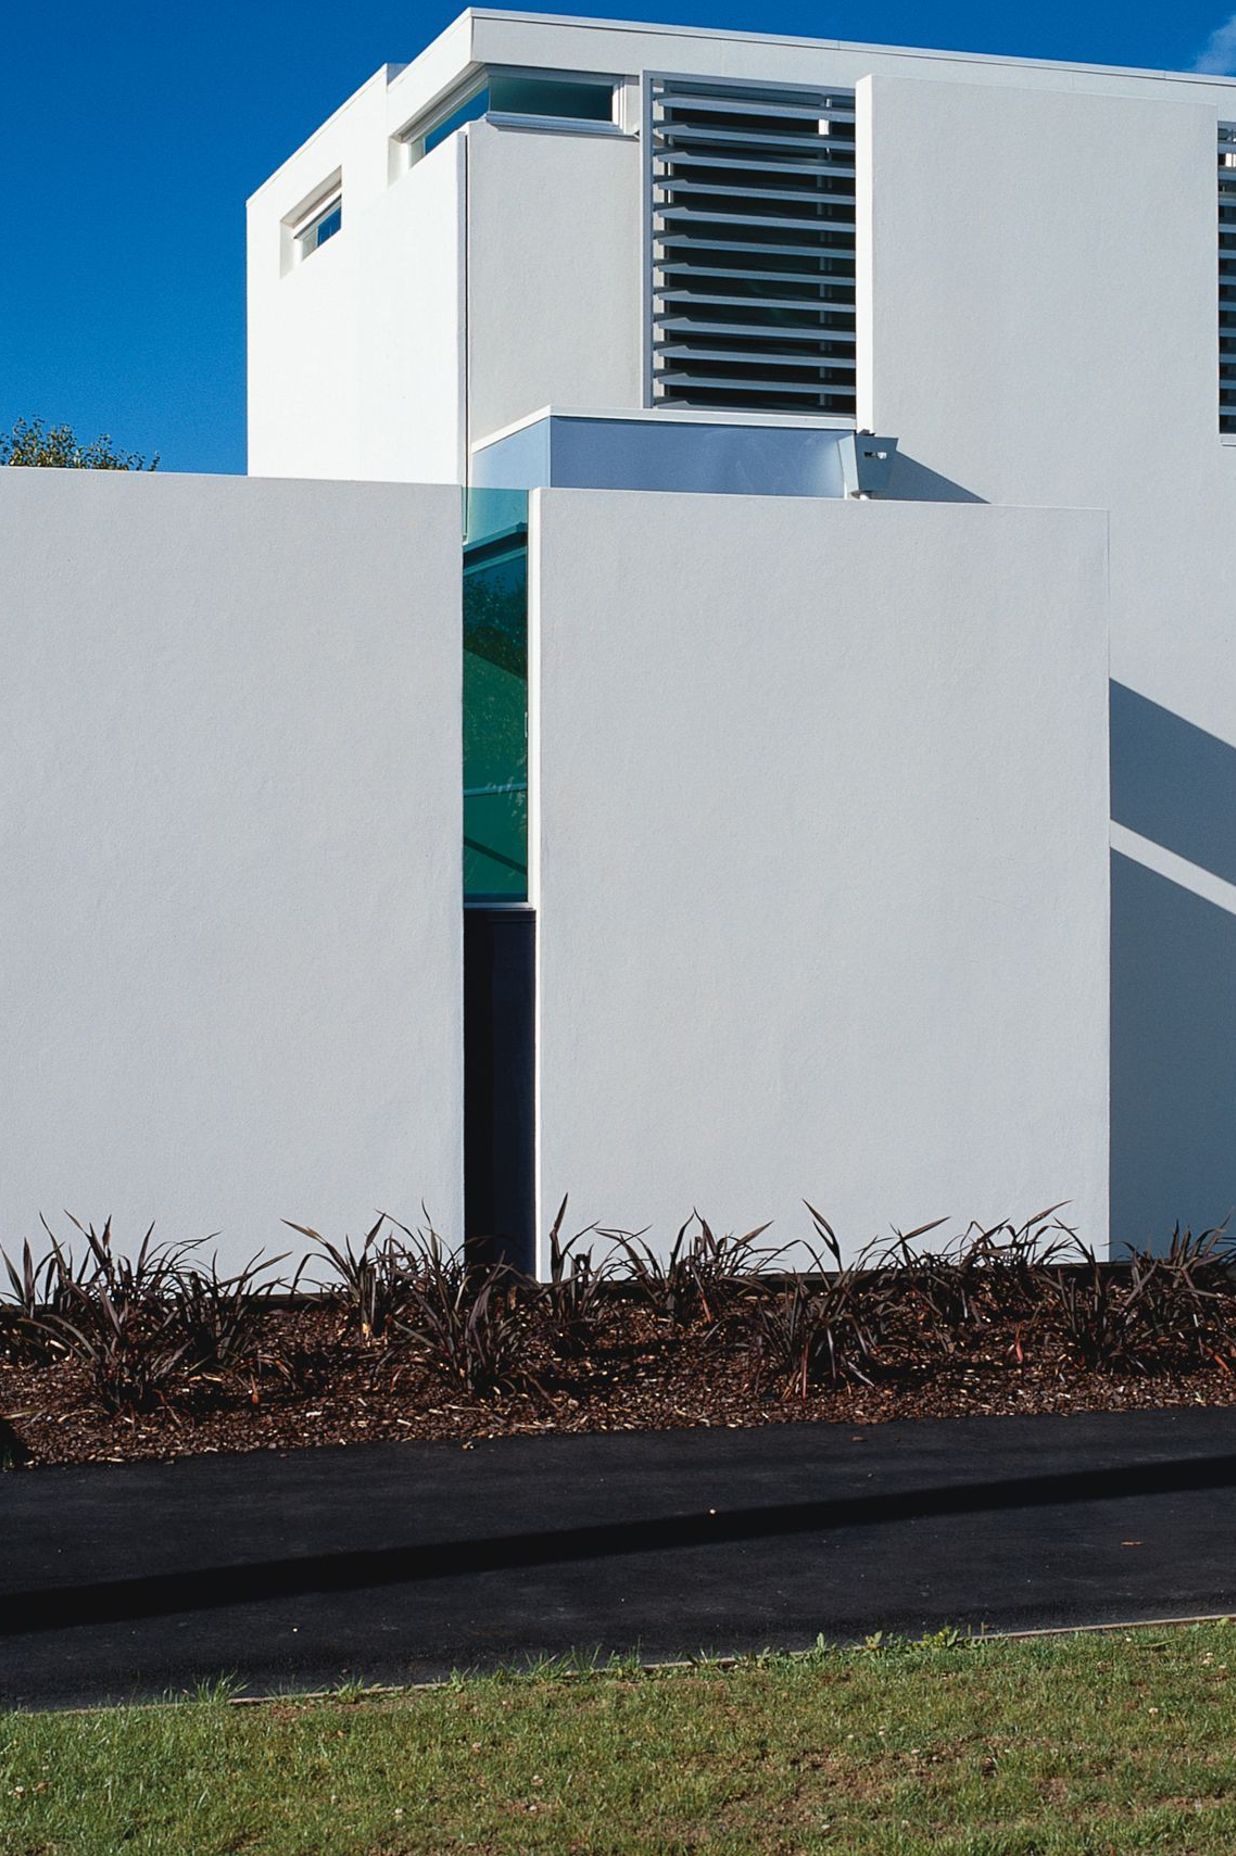 Cubist forms used to provide privacy to the streetscape